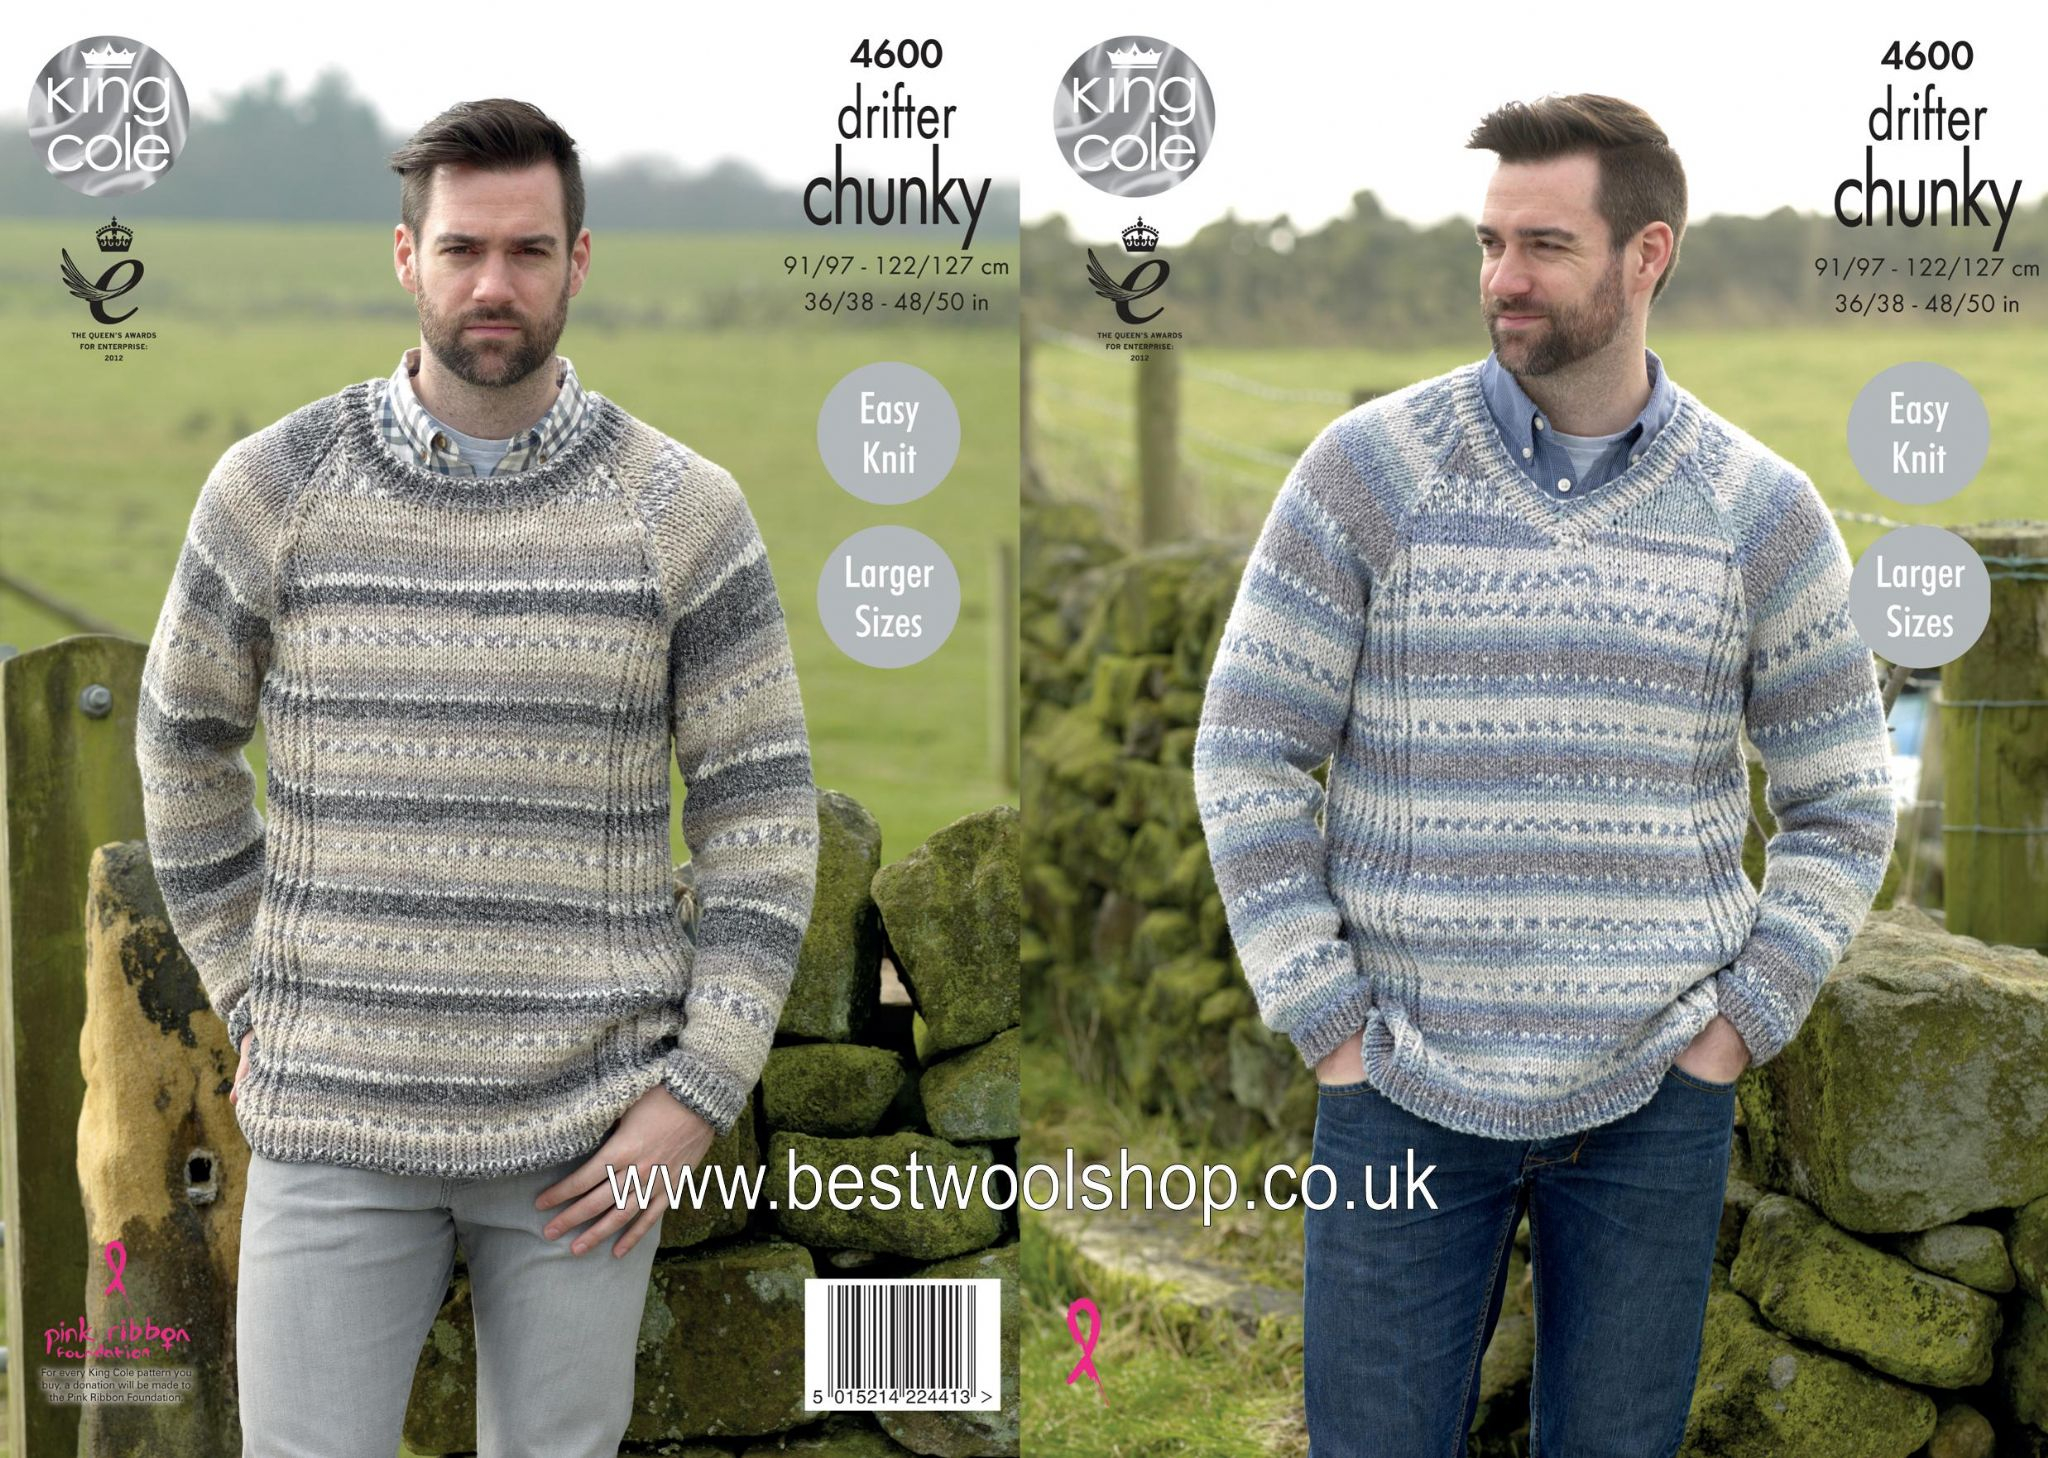 Easy Jumper Knitting Pattern 4600 King Cole Drifter Chunky Easy Knit Mens Round V Neck Sweater Knitting Pattern To Fit Chest 36 To 50